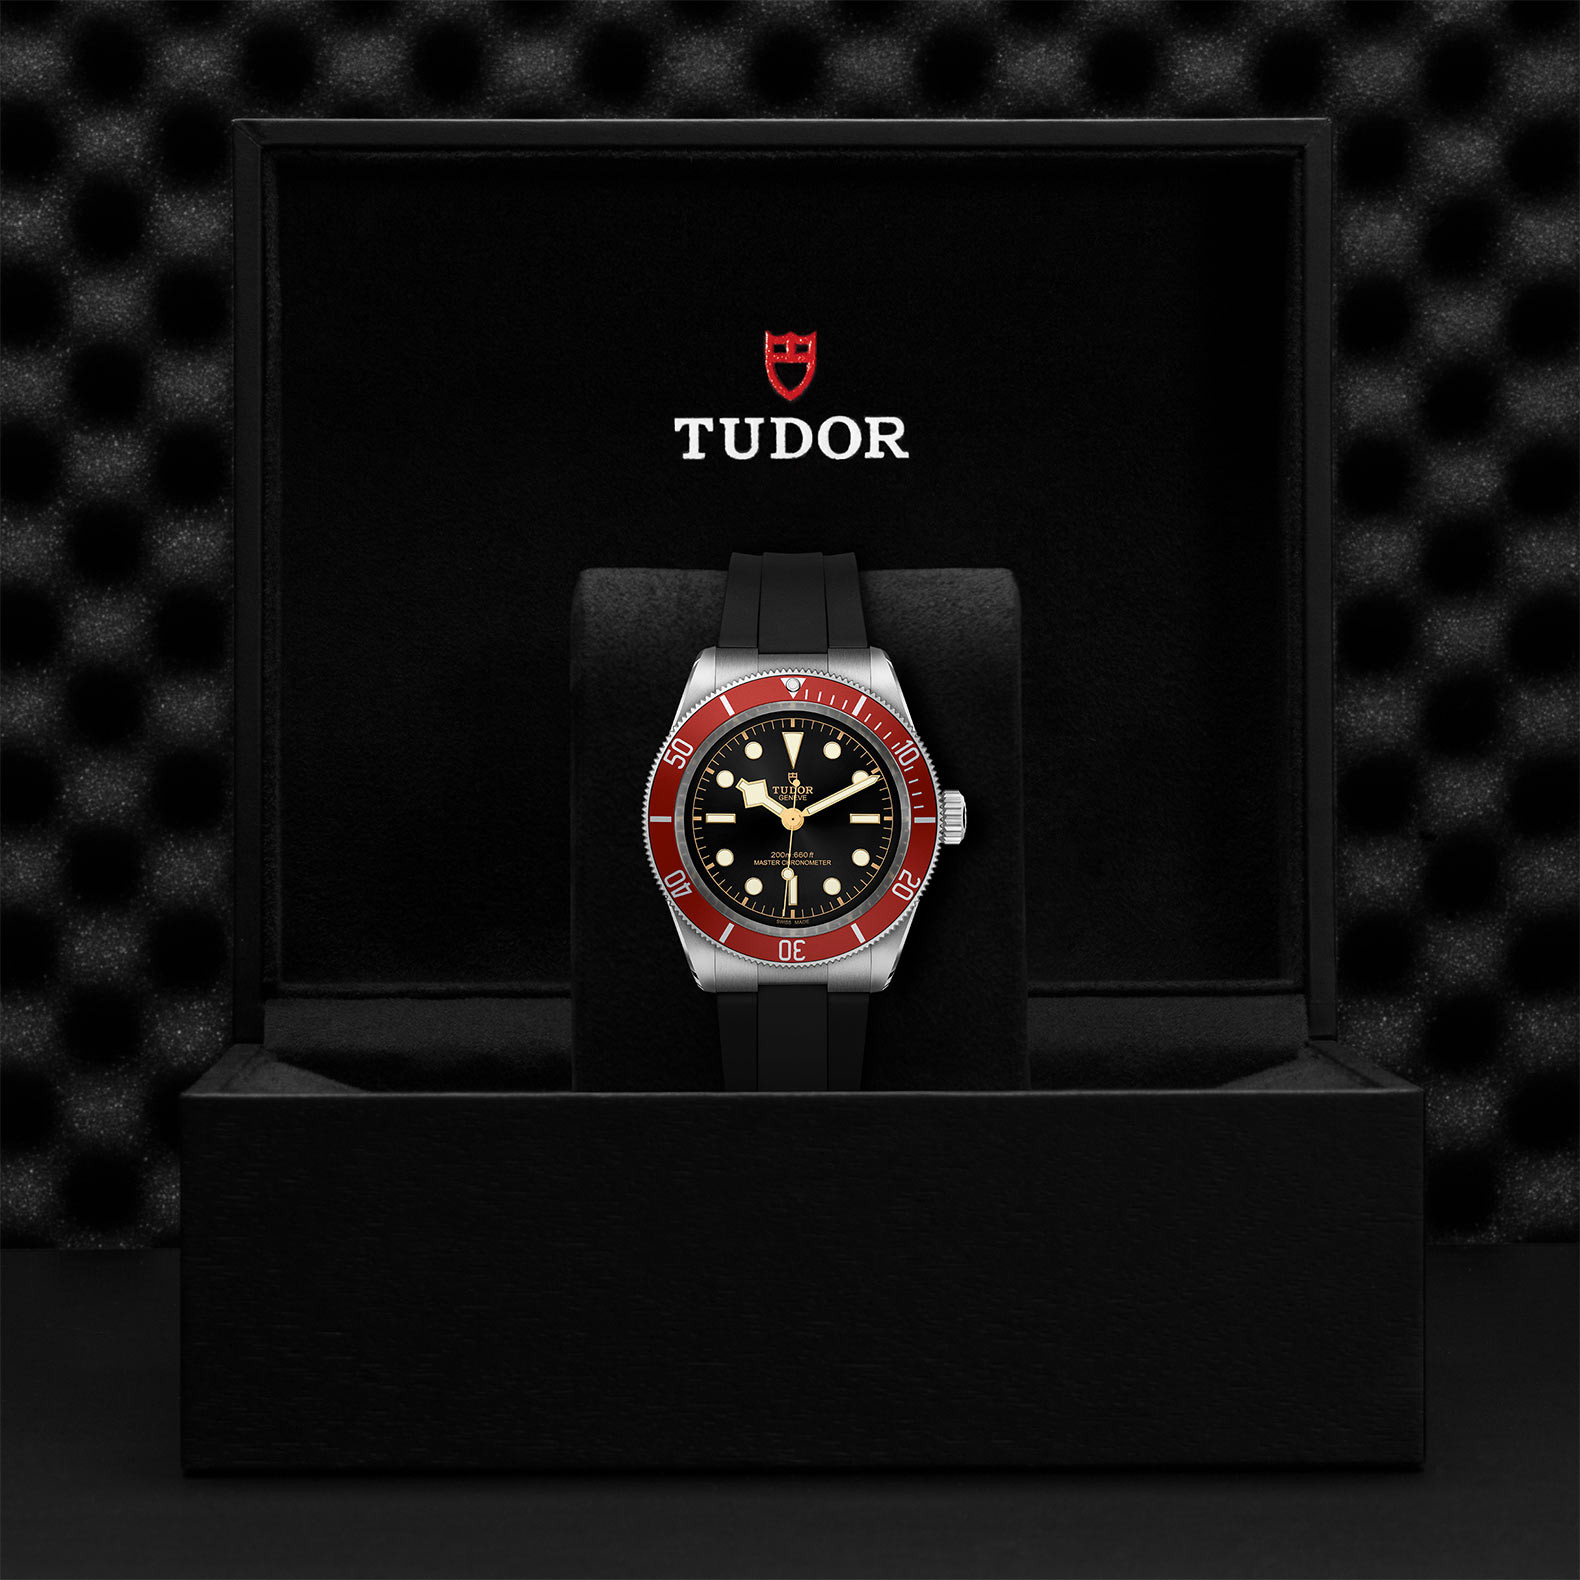 TUDOR Black Bay with 41mm Steel Case and Black Rubber Strap M7941A1A0RU-0002 Watch in Presentation Box